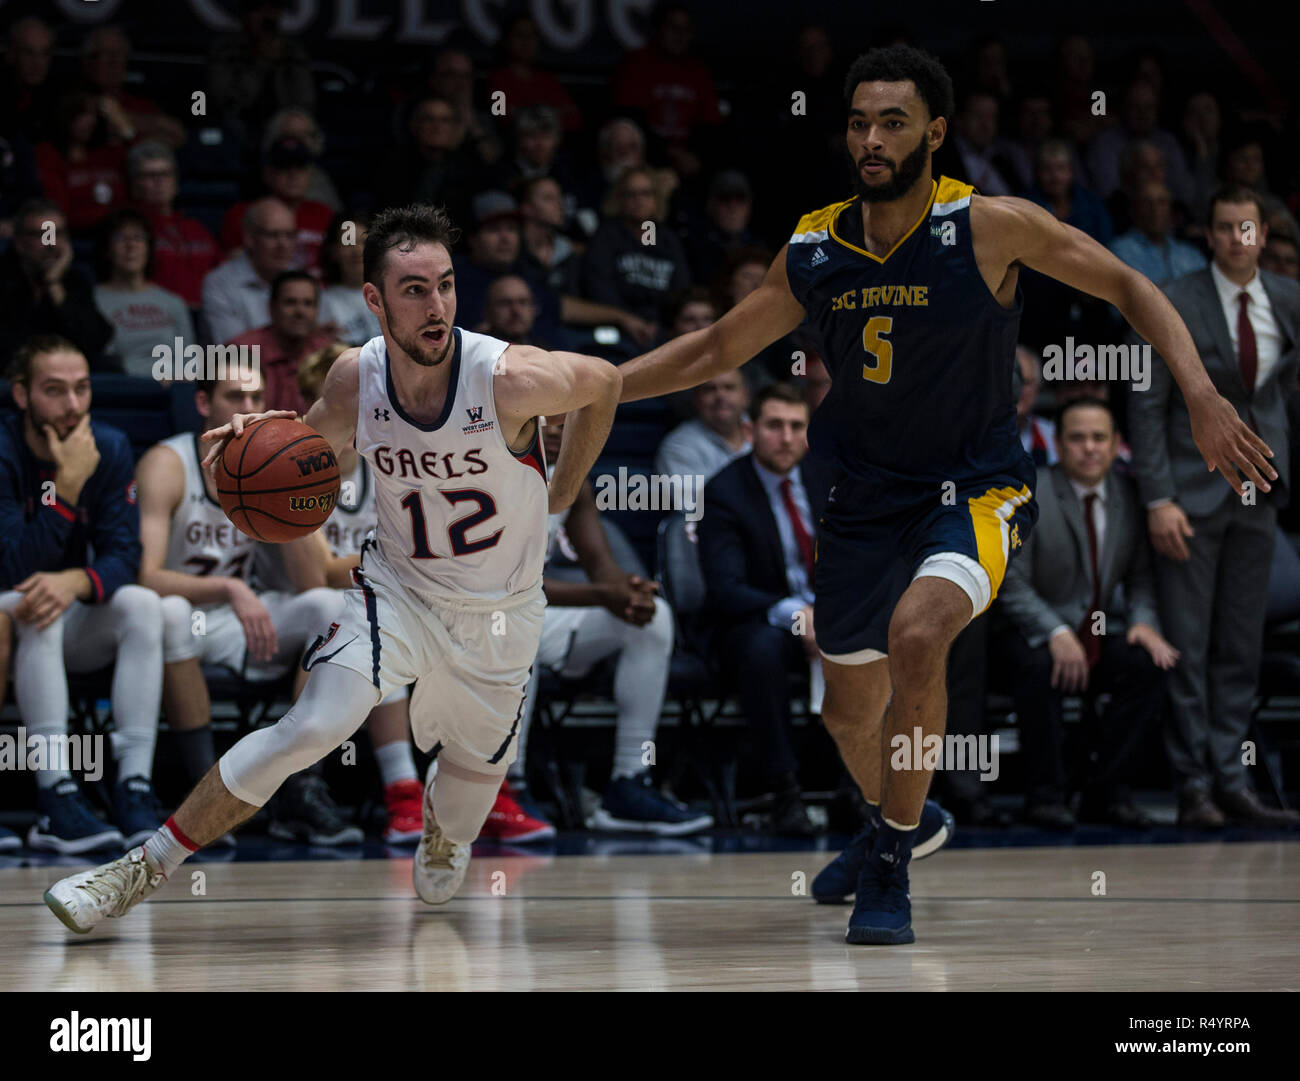 McKeon Pavilion Moraga Calif, USA. 28th Nov, 2018. U.S.A. St. Mary's guard Tommy Kuhse (12) drives to the hoop during the NCAA Men's Basketball game between UC Irvine Anteaters and the Saint Mary's Gaels 75-80 lost at McKeon Pavilion Moraga Calif. Thurman James/CSM/Alamy Live News Stock Photo